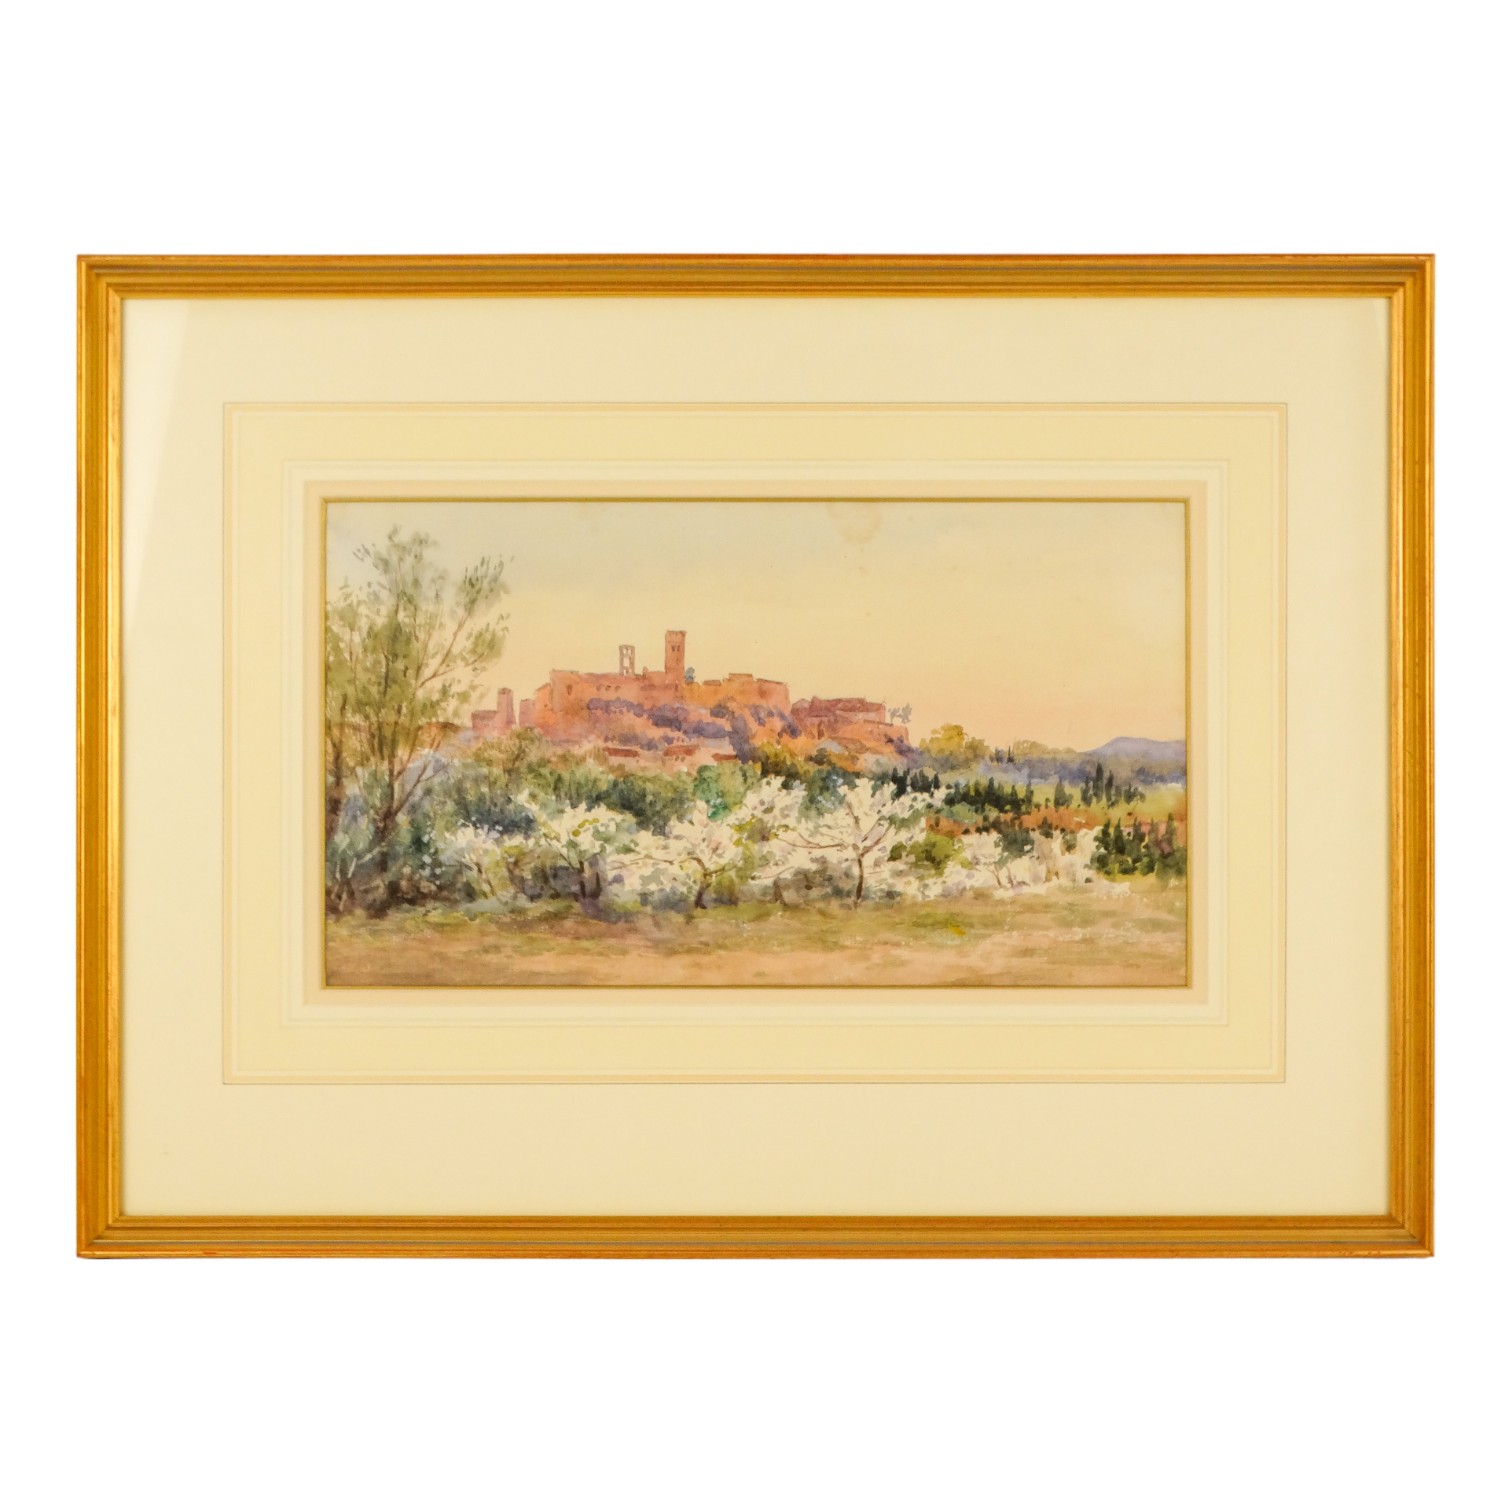 Lady Frances MAXWELL-LYTE (British 1853-1925) Elne nr. Perpignan Watercolour Framed and glazed - Image 2 of 4